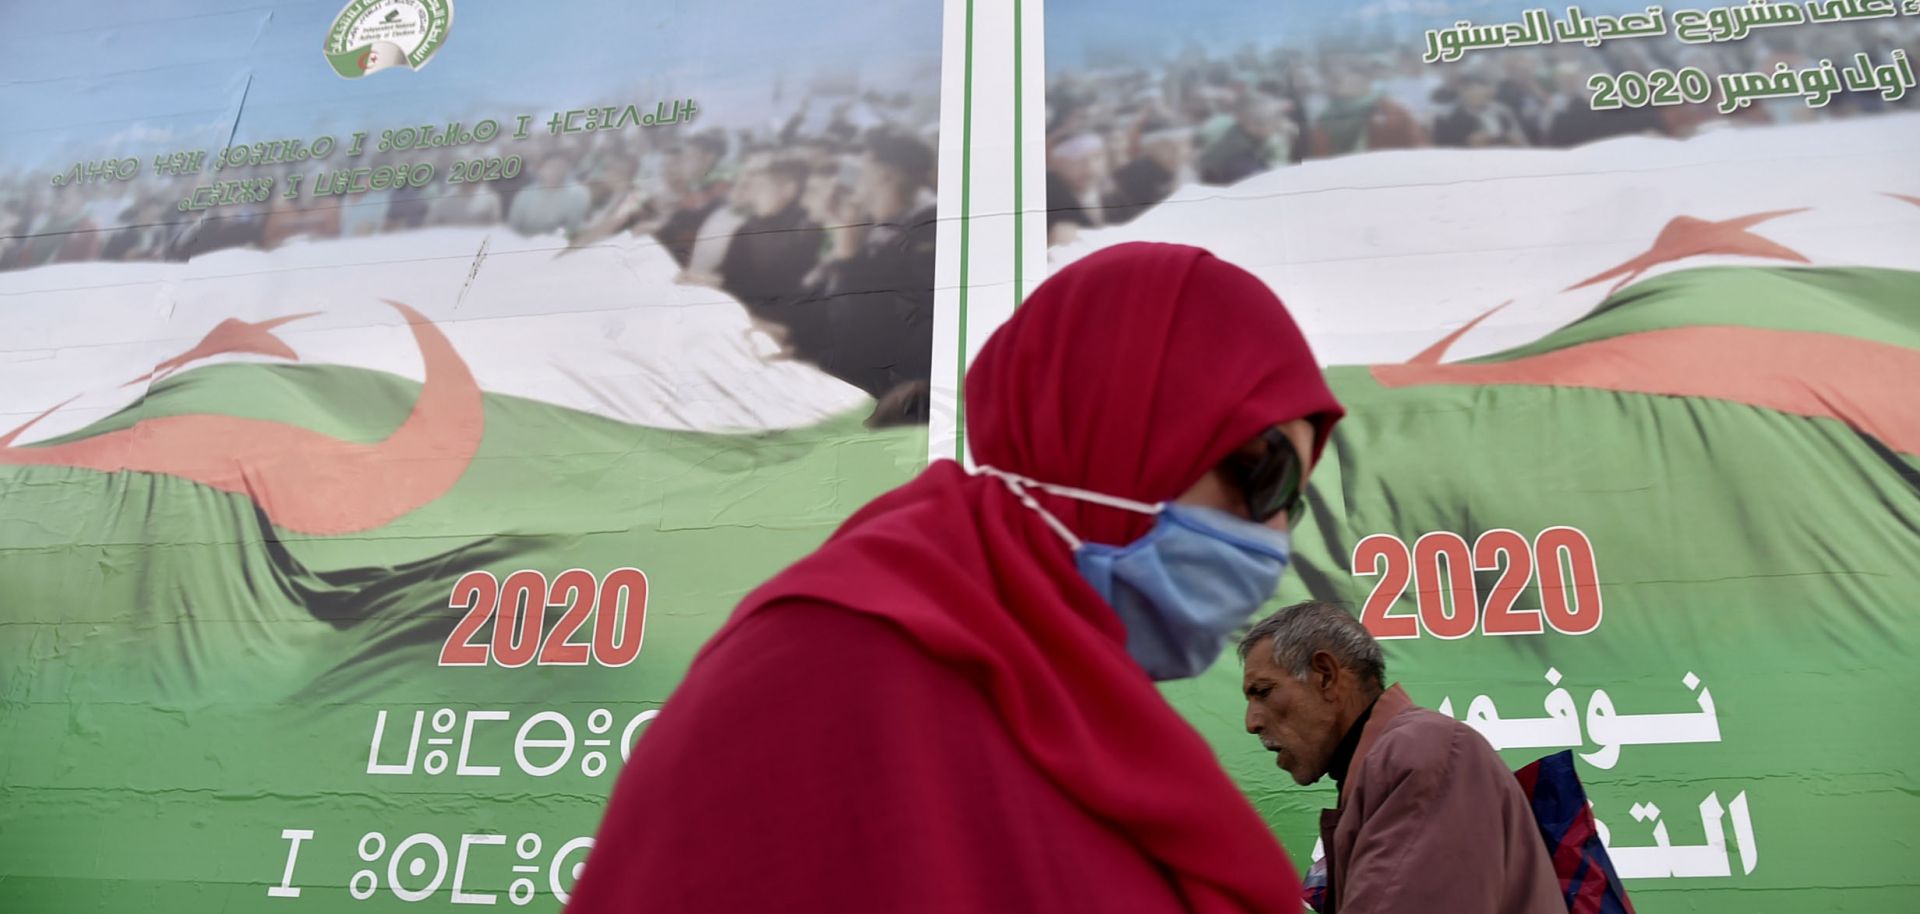 People walk past campaign billboards ahead of the upcoming constitutional referendum on a street in Algiers, Algeria, on Oct. 22, 2020. 